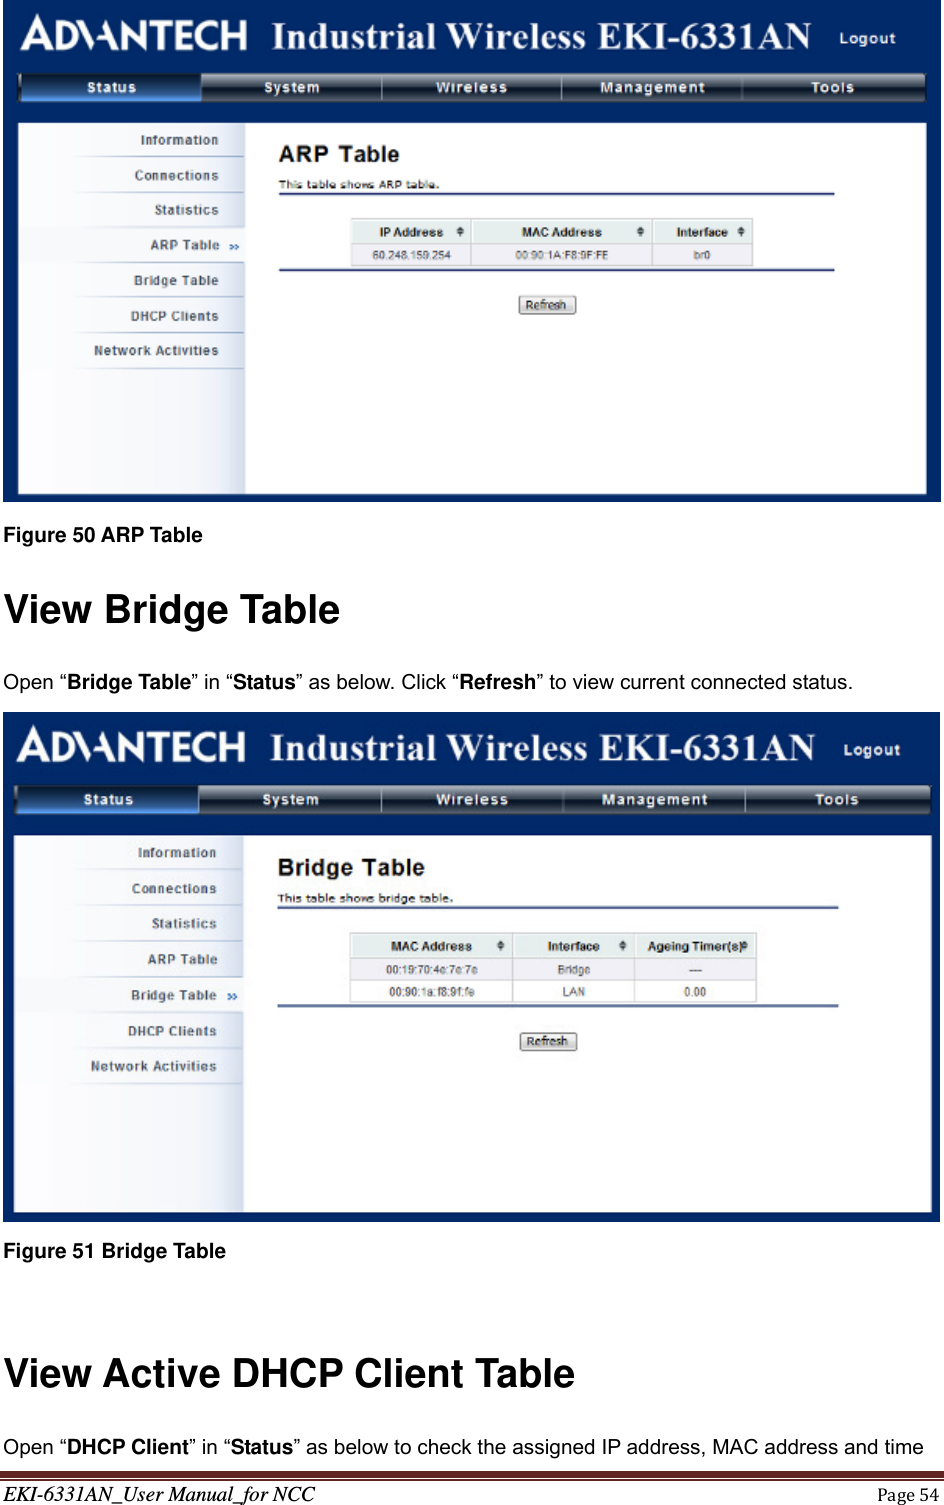 EKI-6331AN_User Manual_for NCCPage54 Figure 50 ARP Table View Bridge Table Open “Bridge Table” in “Status” as below. Click “Refresh” to view current connected status.  Figure 51 Bridge Table  View Active DHCP Client Table Open “DHCP Client” in “Status” as below to check the assigned IP address, MAC address and time 